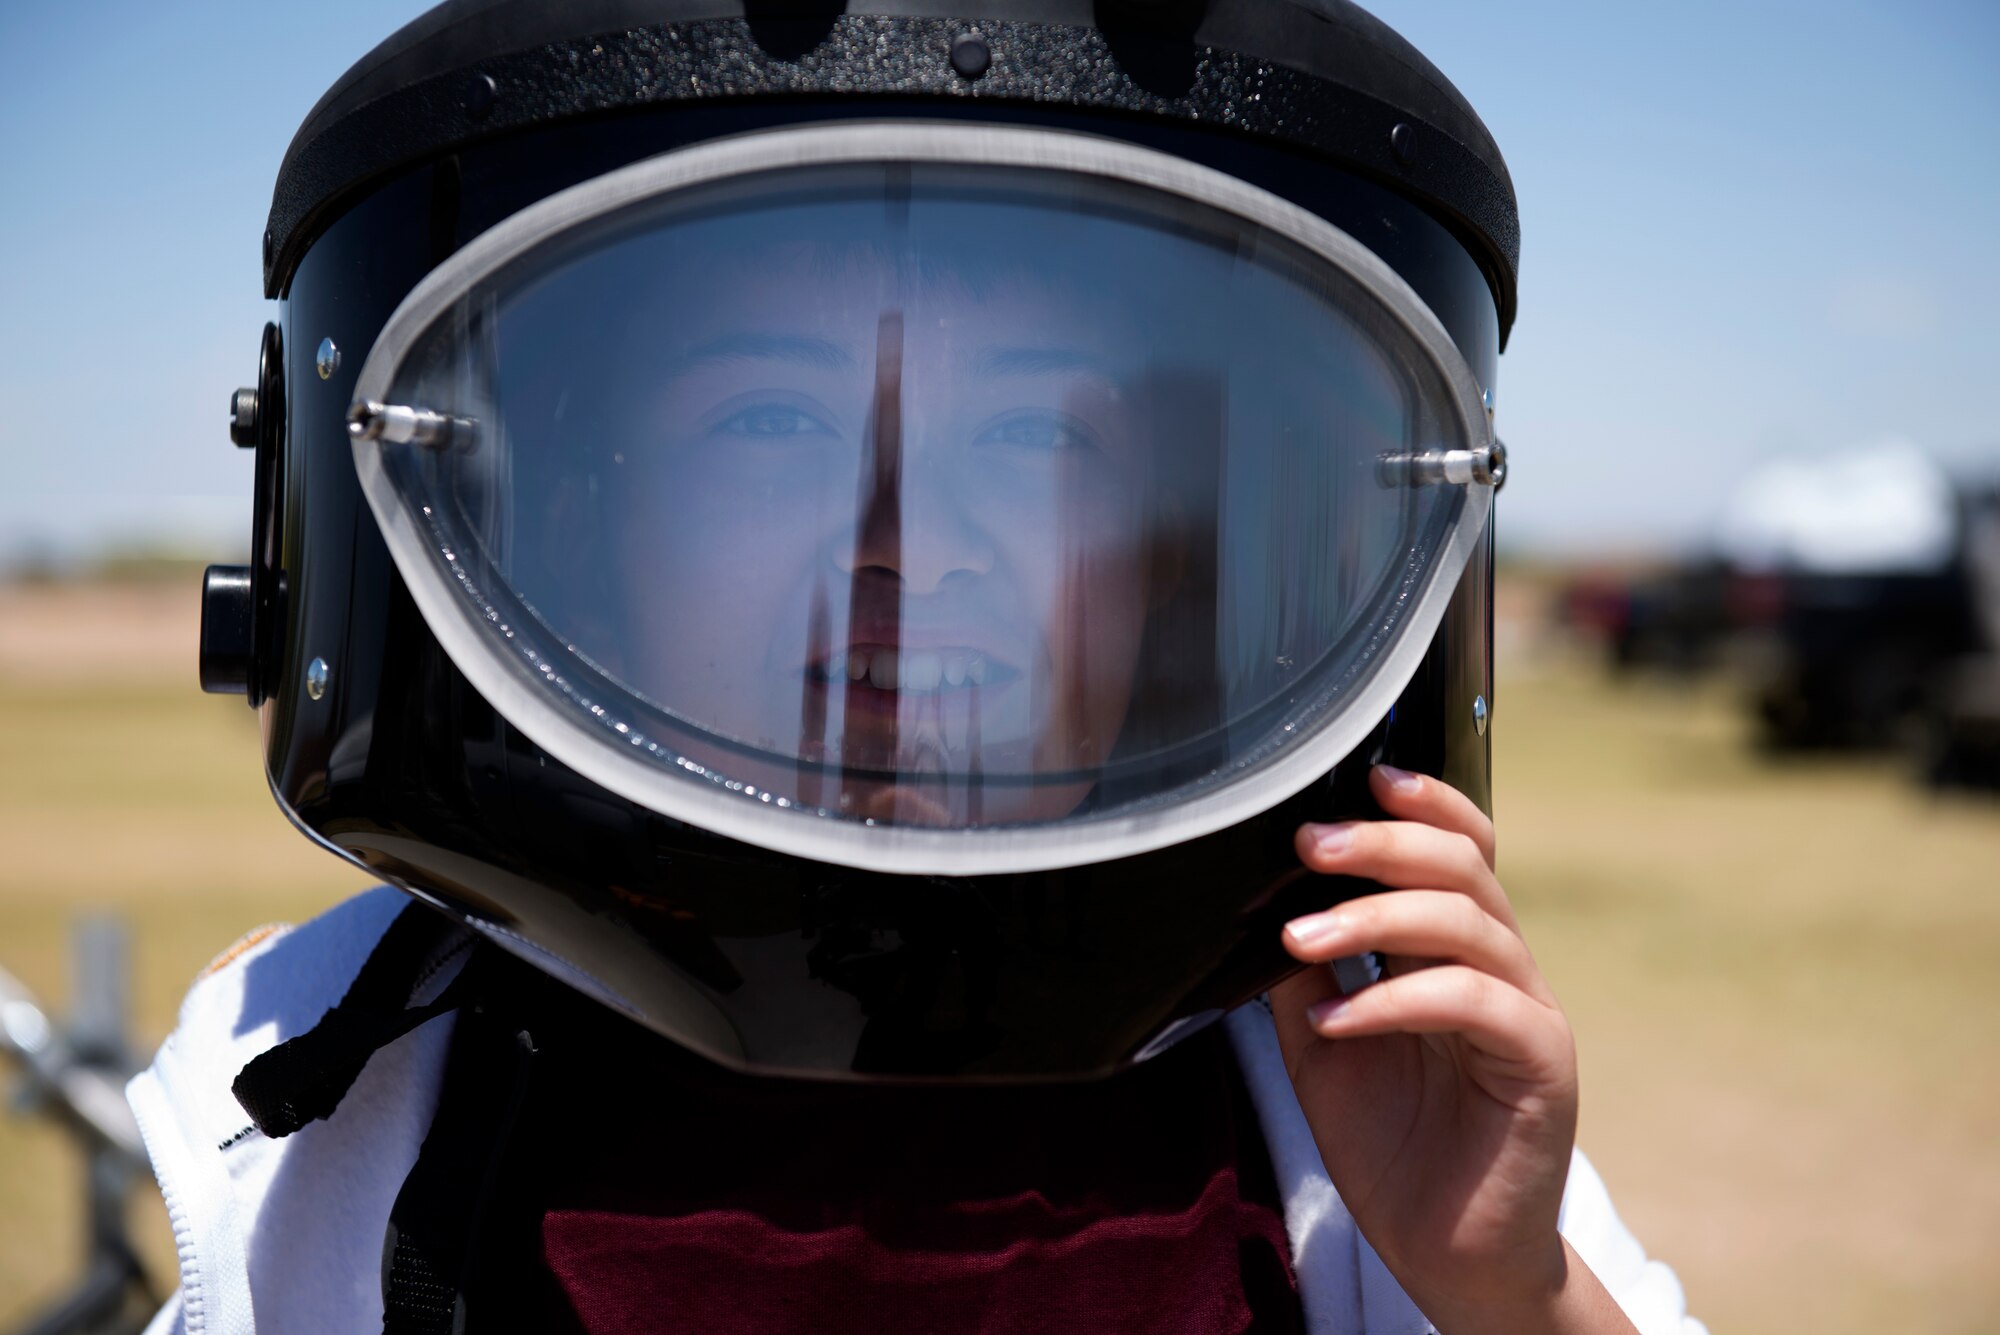 A student from L. Thomas Heck Middle School smiles through the visor of a 56th Civil Engineer Squadron explosive ordnance disposal bomb suit helmet April 20, 2018, in Litchfield Park, Ariz. Students could try on suits, uniform items, and other protective wear commonly used by Luke Air Force Base Airmen. (U.S. Air Force photo by Senior Airman Ridge Shan)